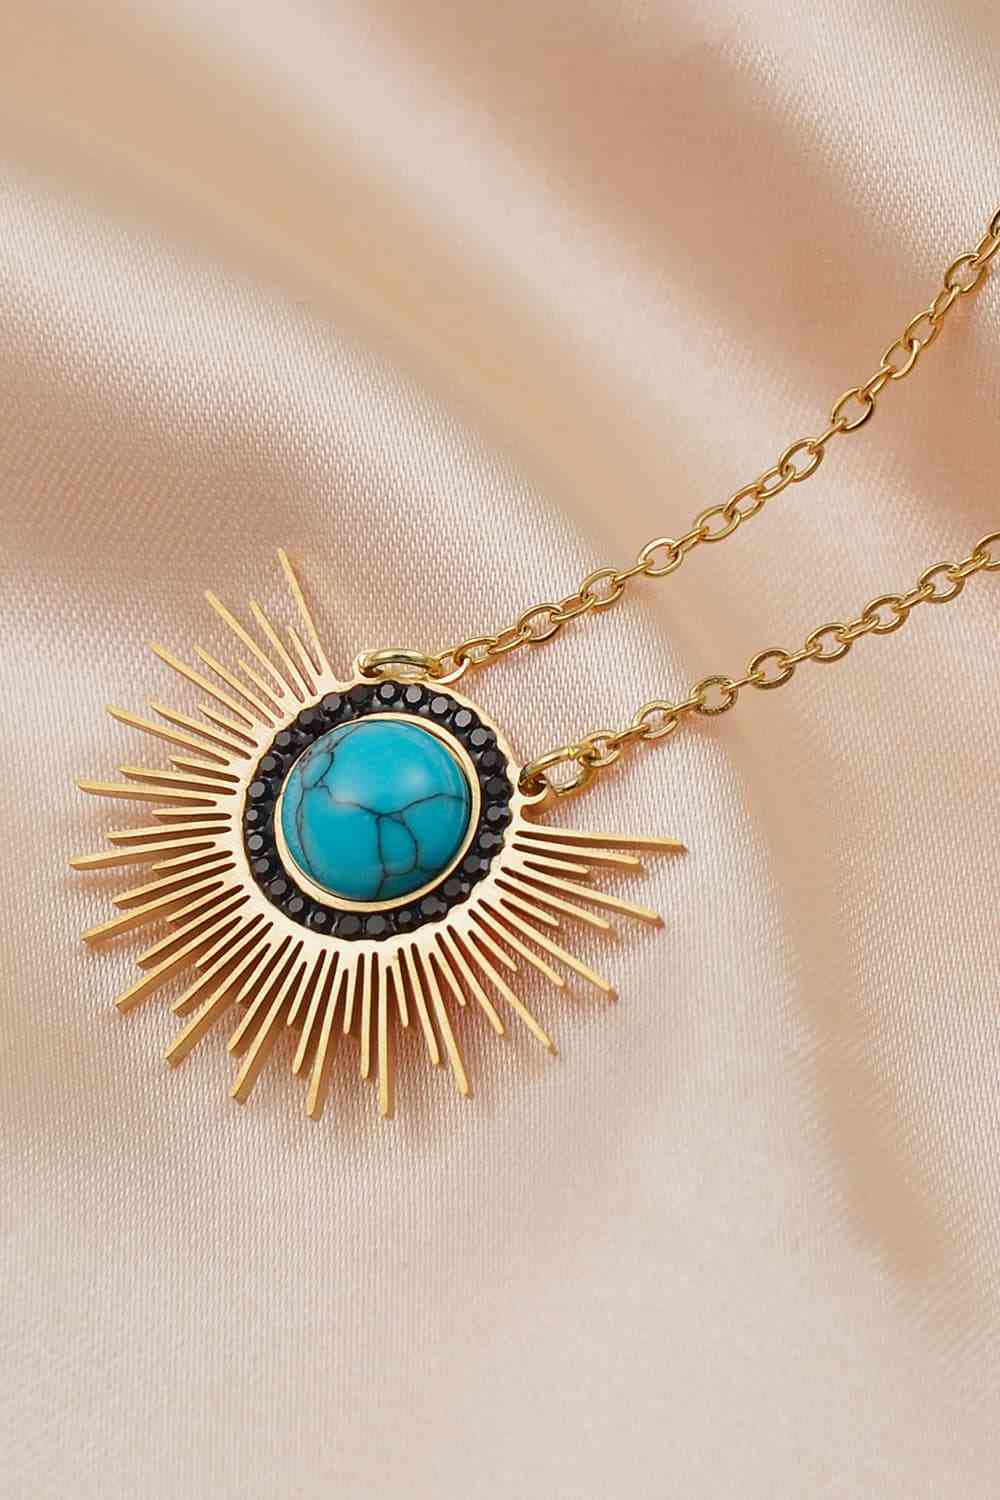 Collier pendentif plaqué or 14 carats turquoise